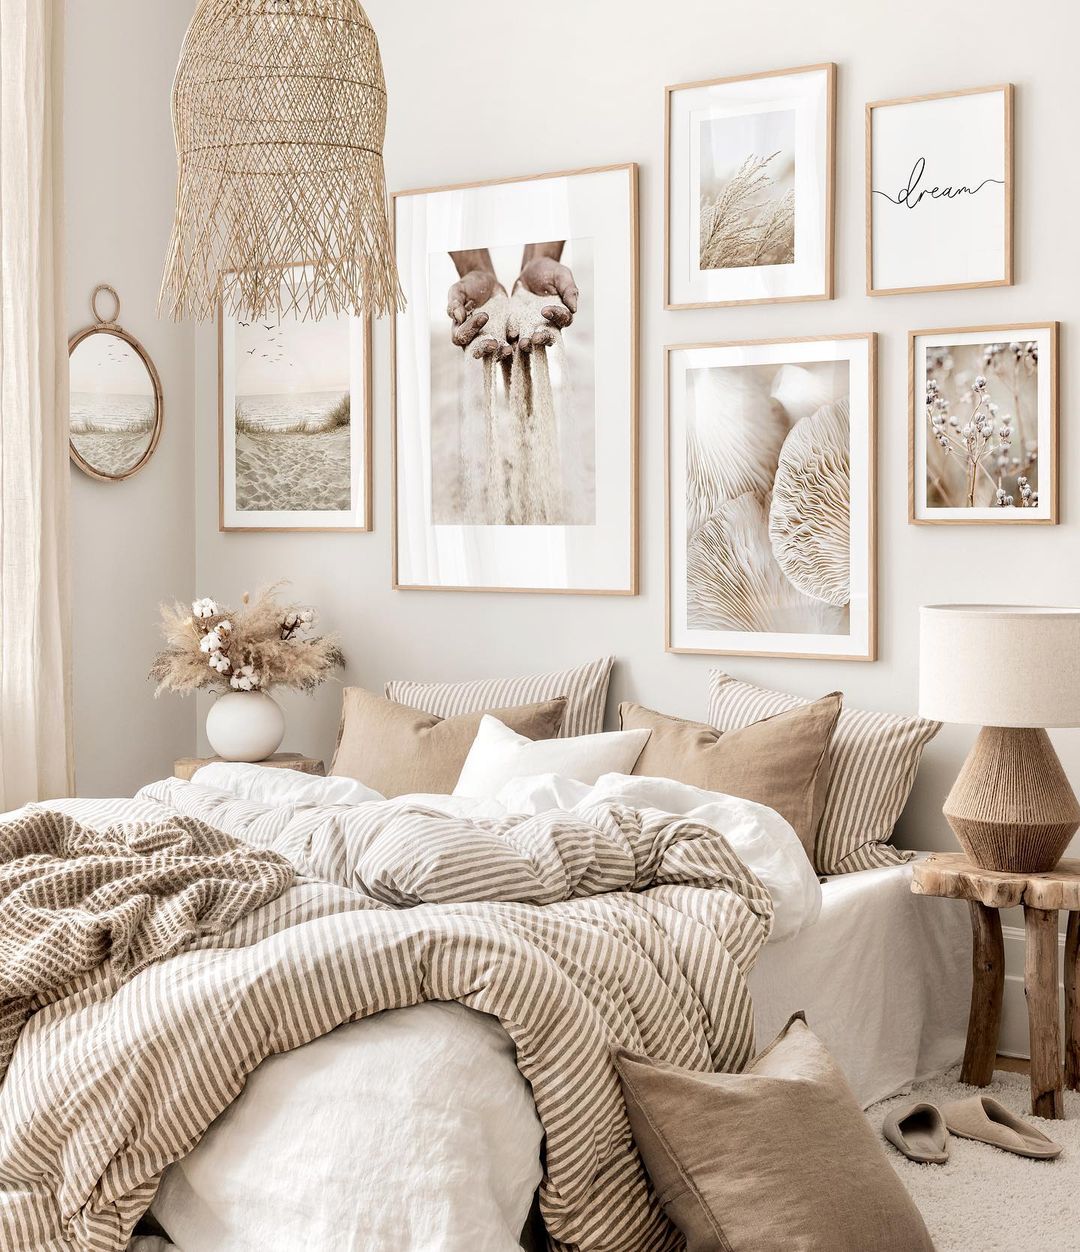 Top 10 Decorating Ideas For A Better Bedroom in 2021 - Decoholic